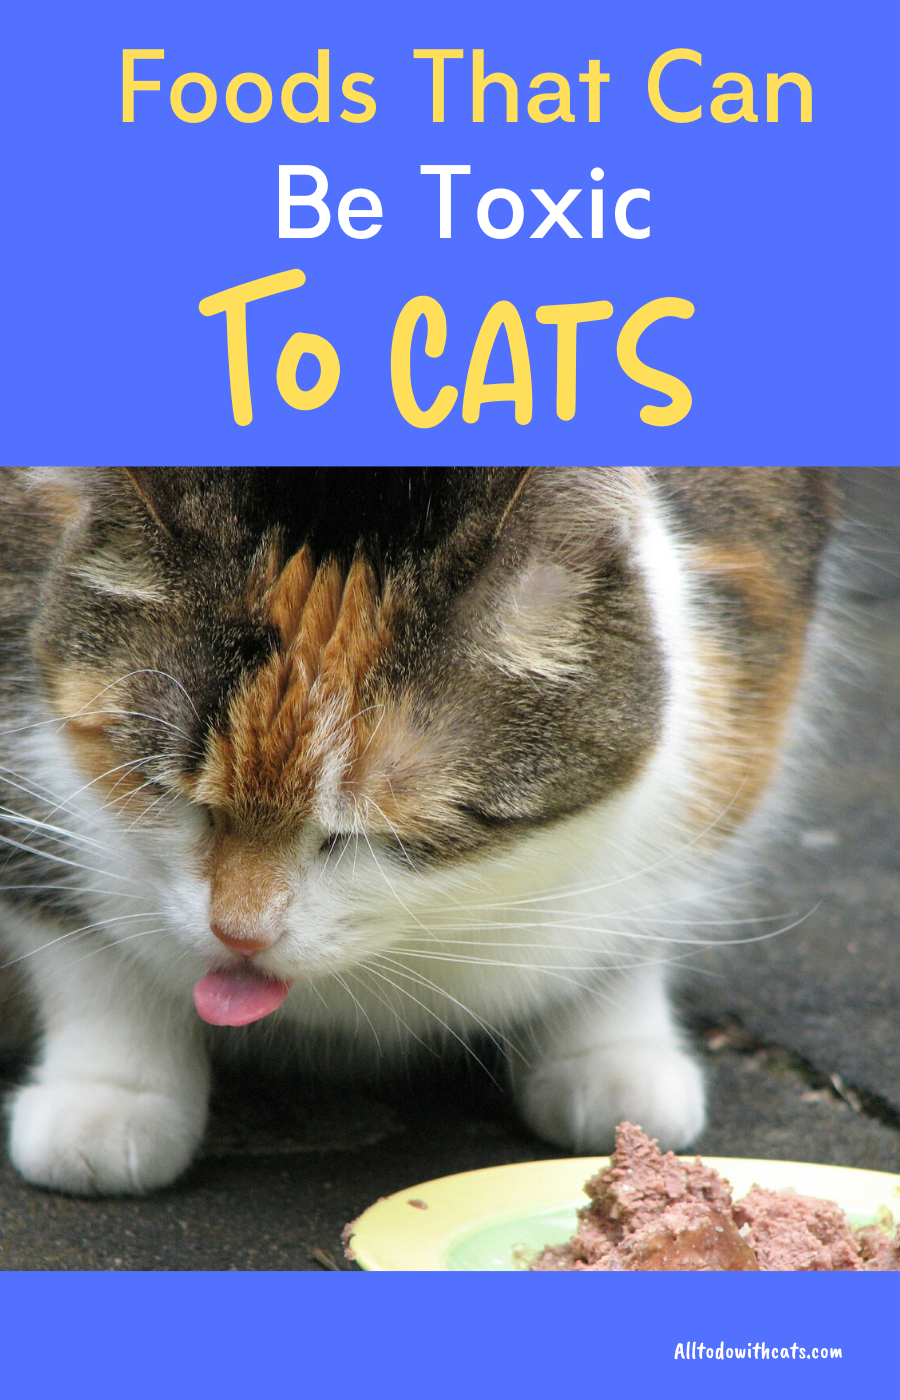 What Foods Are Bad For Cats?: How To Prevent Your Kitty ...